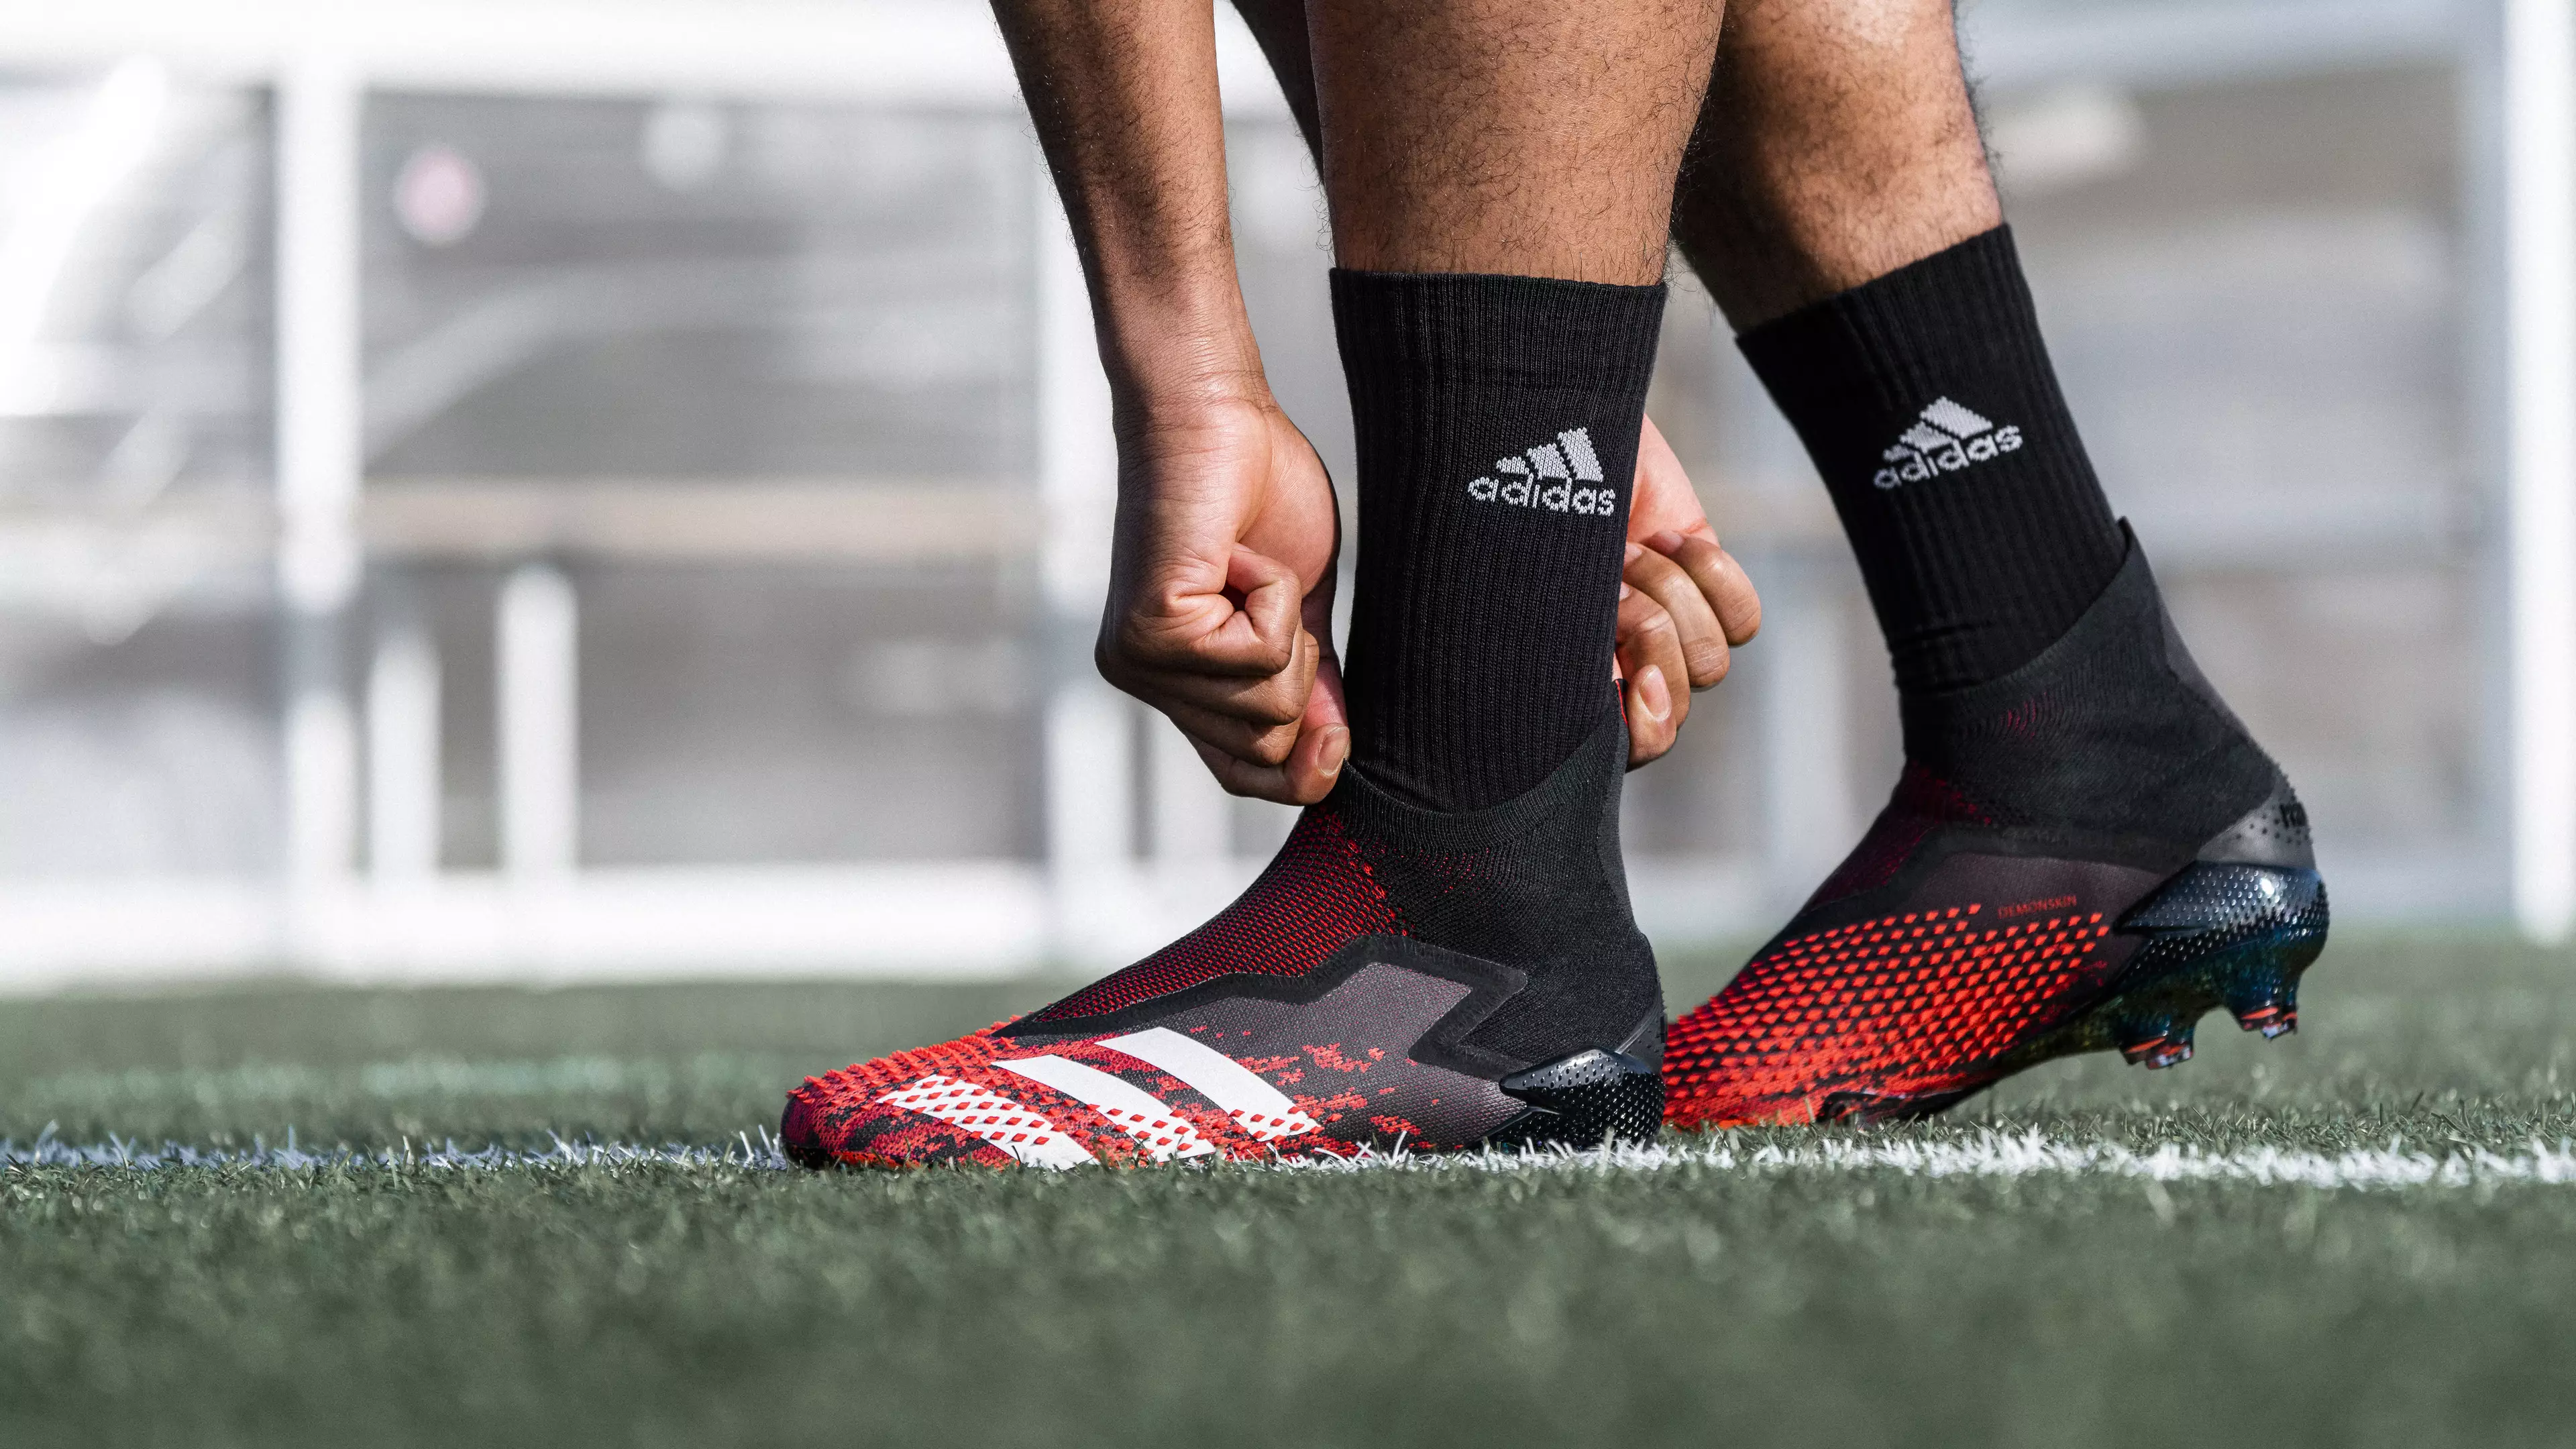 Adidas designer Robert Ashcroft thinks the new boots can help Sunday league players